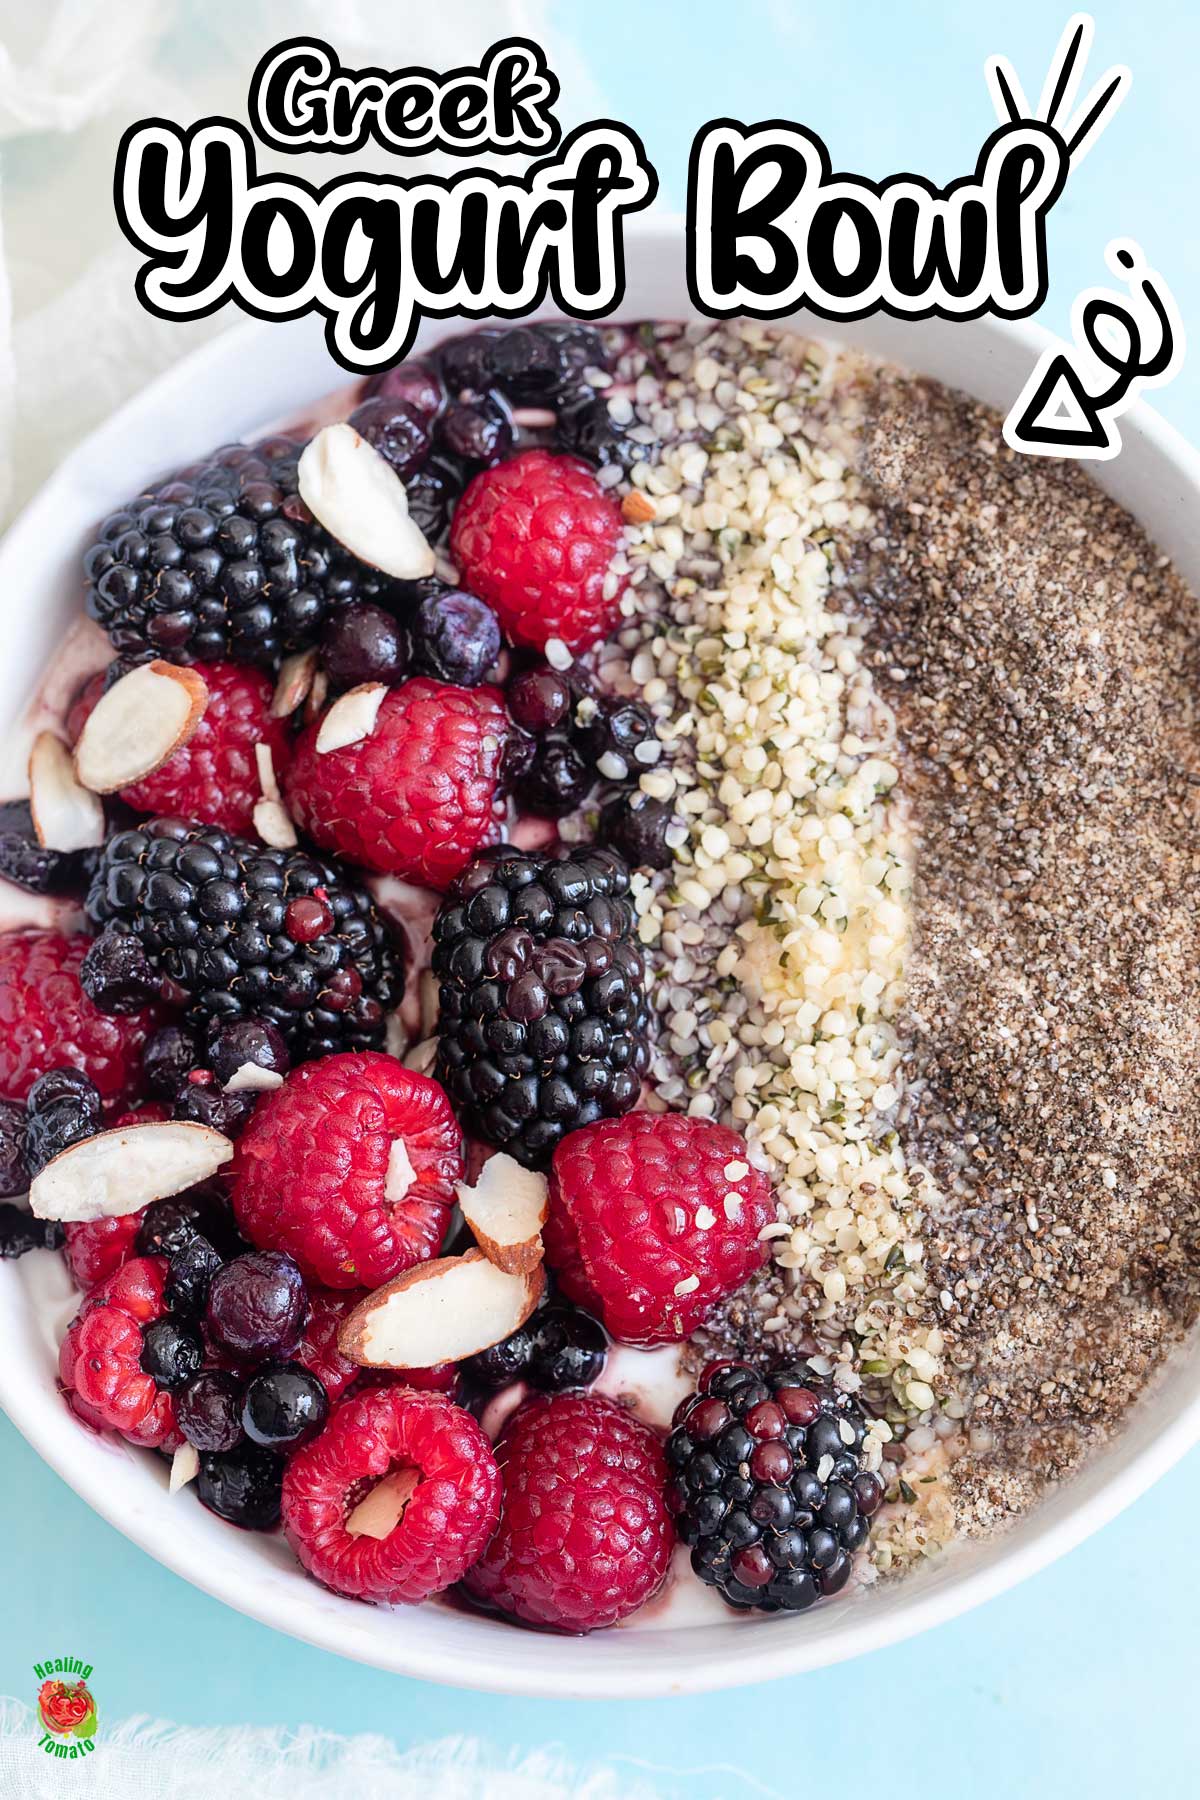 Closeup of the breakfast bowl that shows the berries, seeds and almonds.